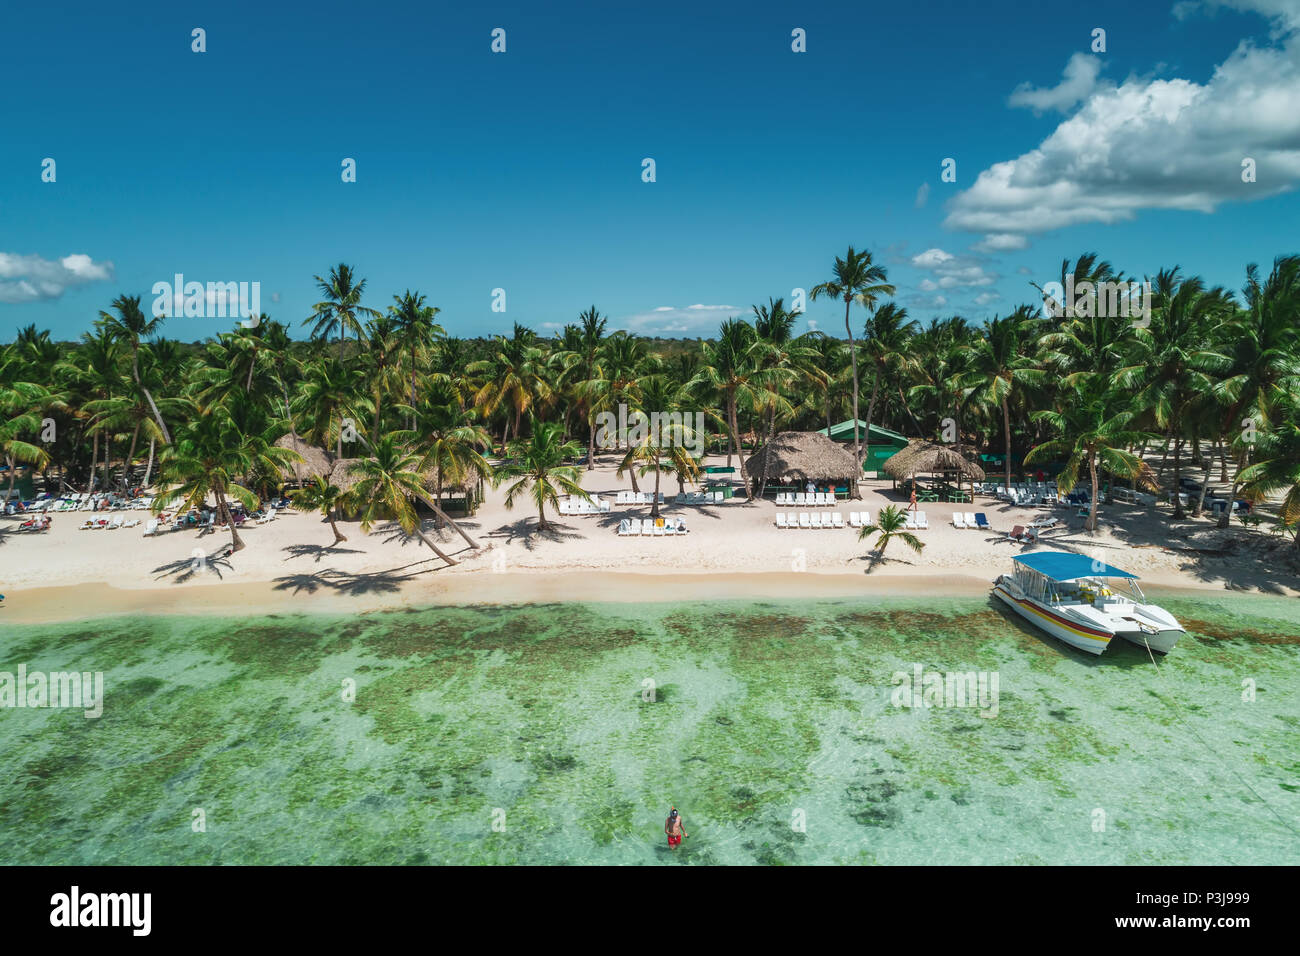 Aerial view of tropical island beach, Dominican Republic Stock Photo